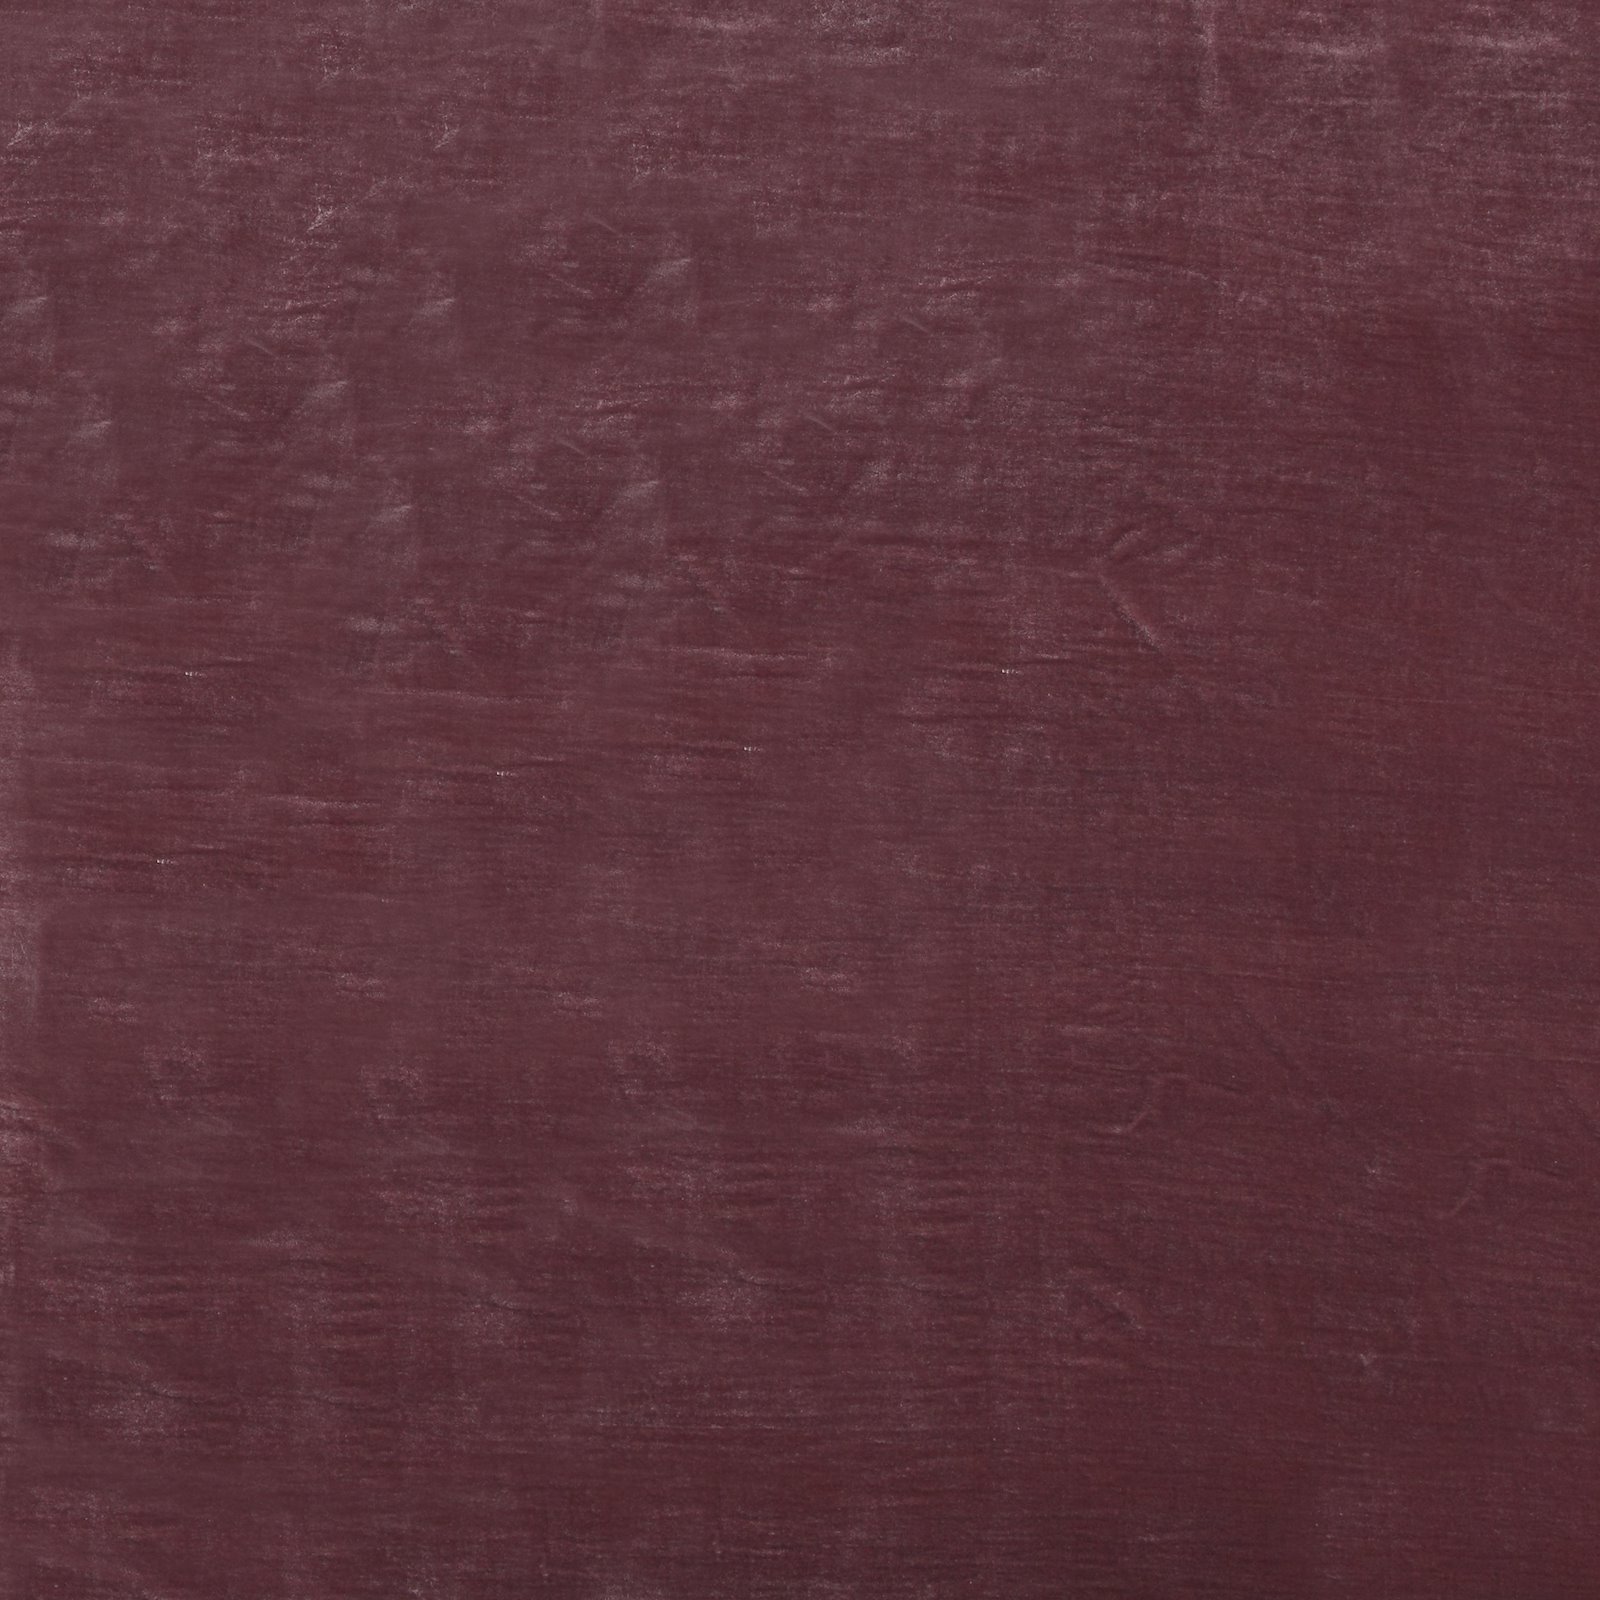 Woven viscose velvet dusty heather 480130_pack_solid